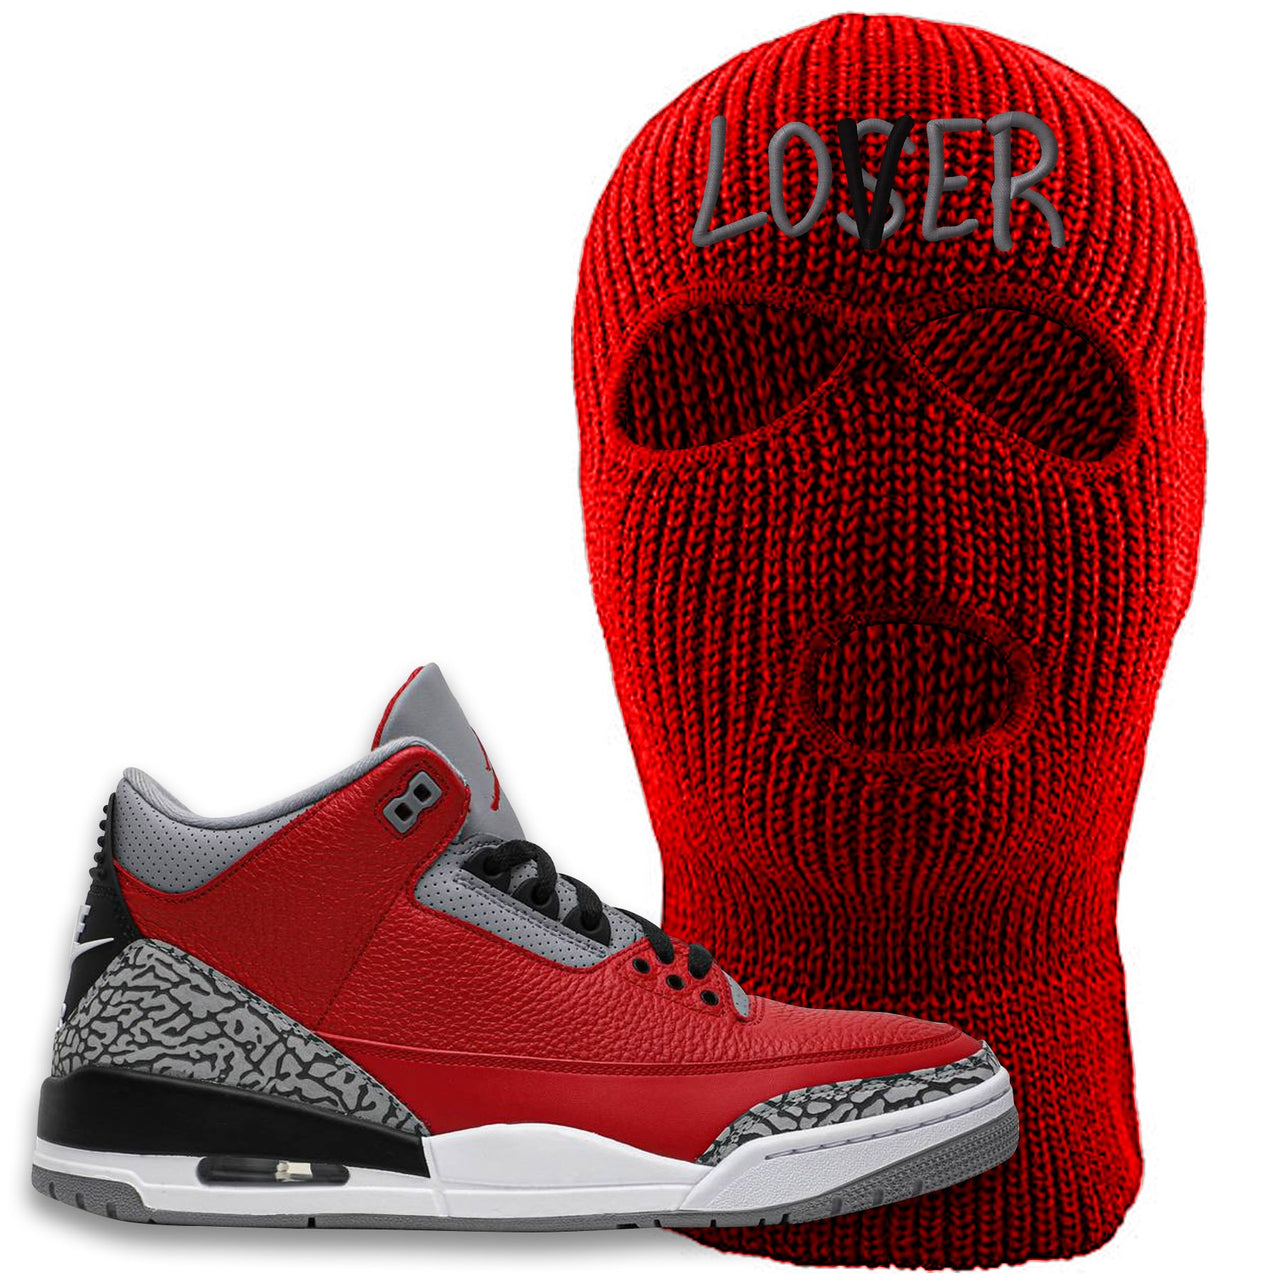 Chicago Exclusive Jordan 3 Cement Sneaker Red Ski Mask | Winter Mask to match Jordan 3 All Star Red Cement Shoes | Lover